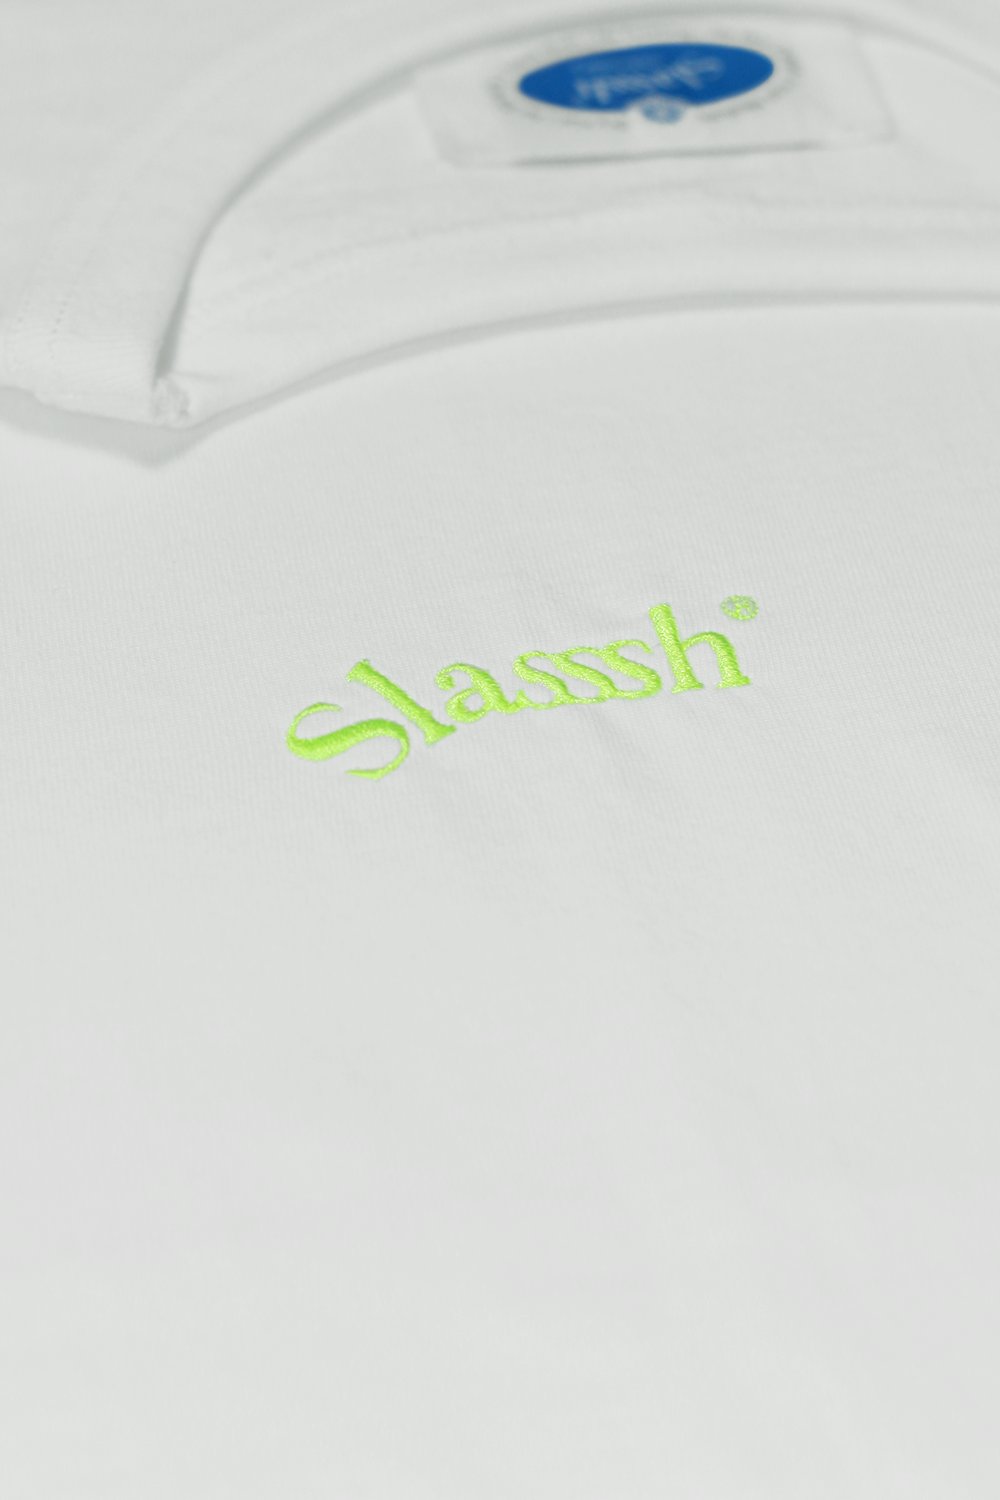 Graphic Embroidery Tee - Classic Logotype Embroidery Tee